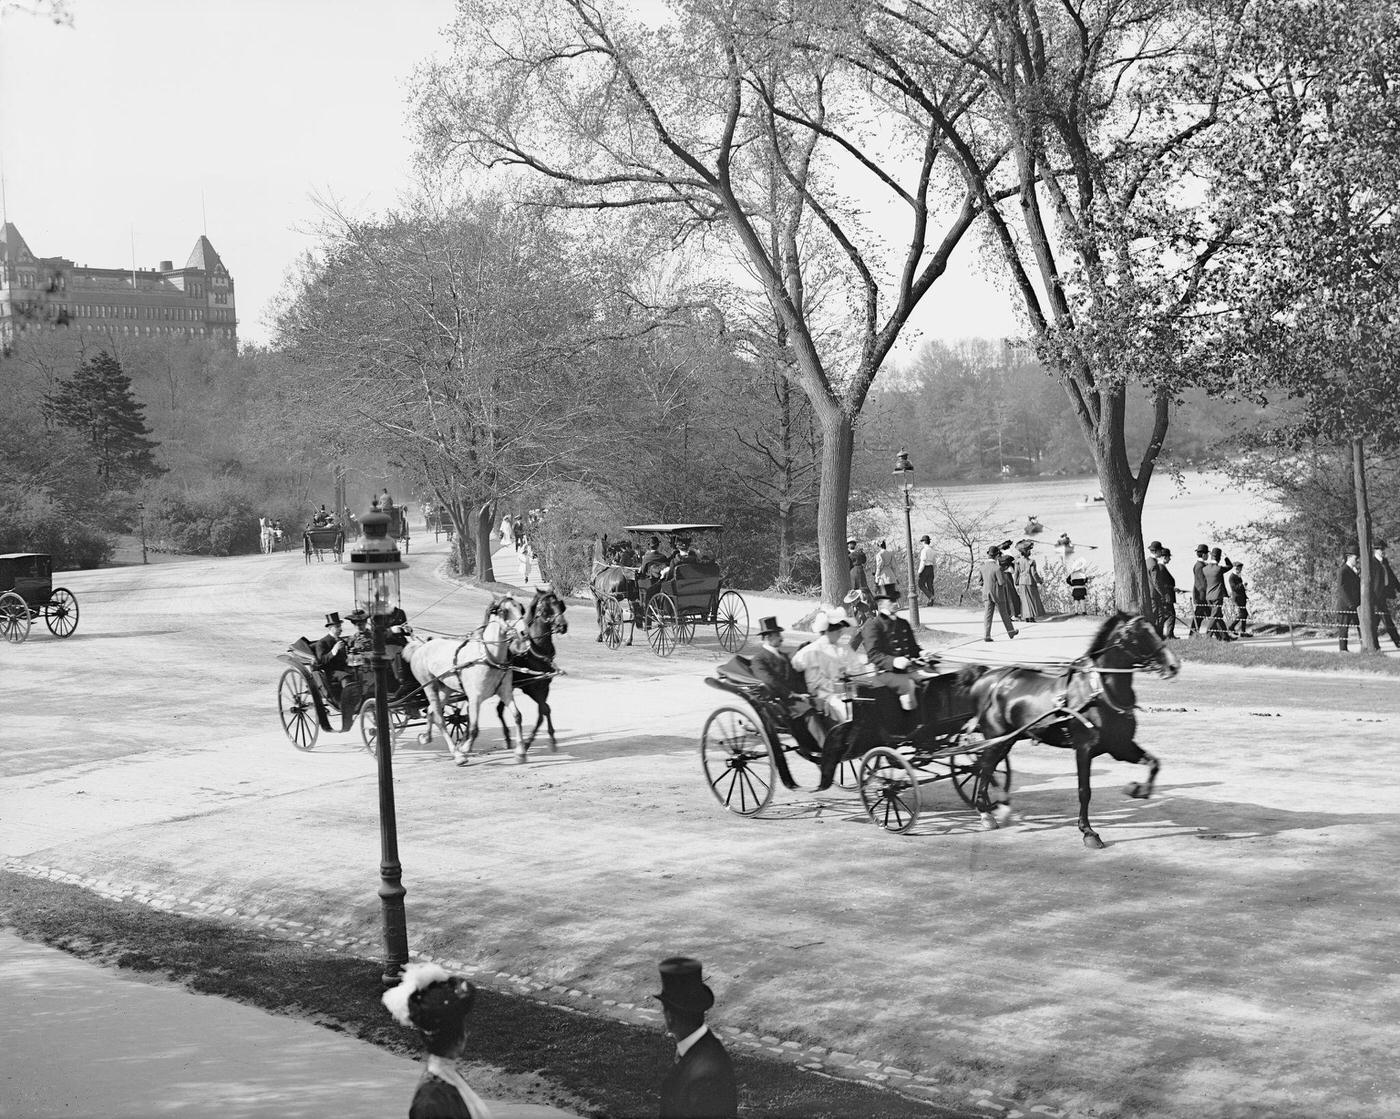 Horse-Drawn Carriages And Coaches On The Driveway, Central Park, New York City, 1900